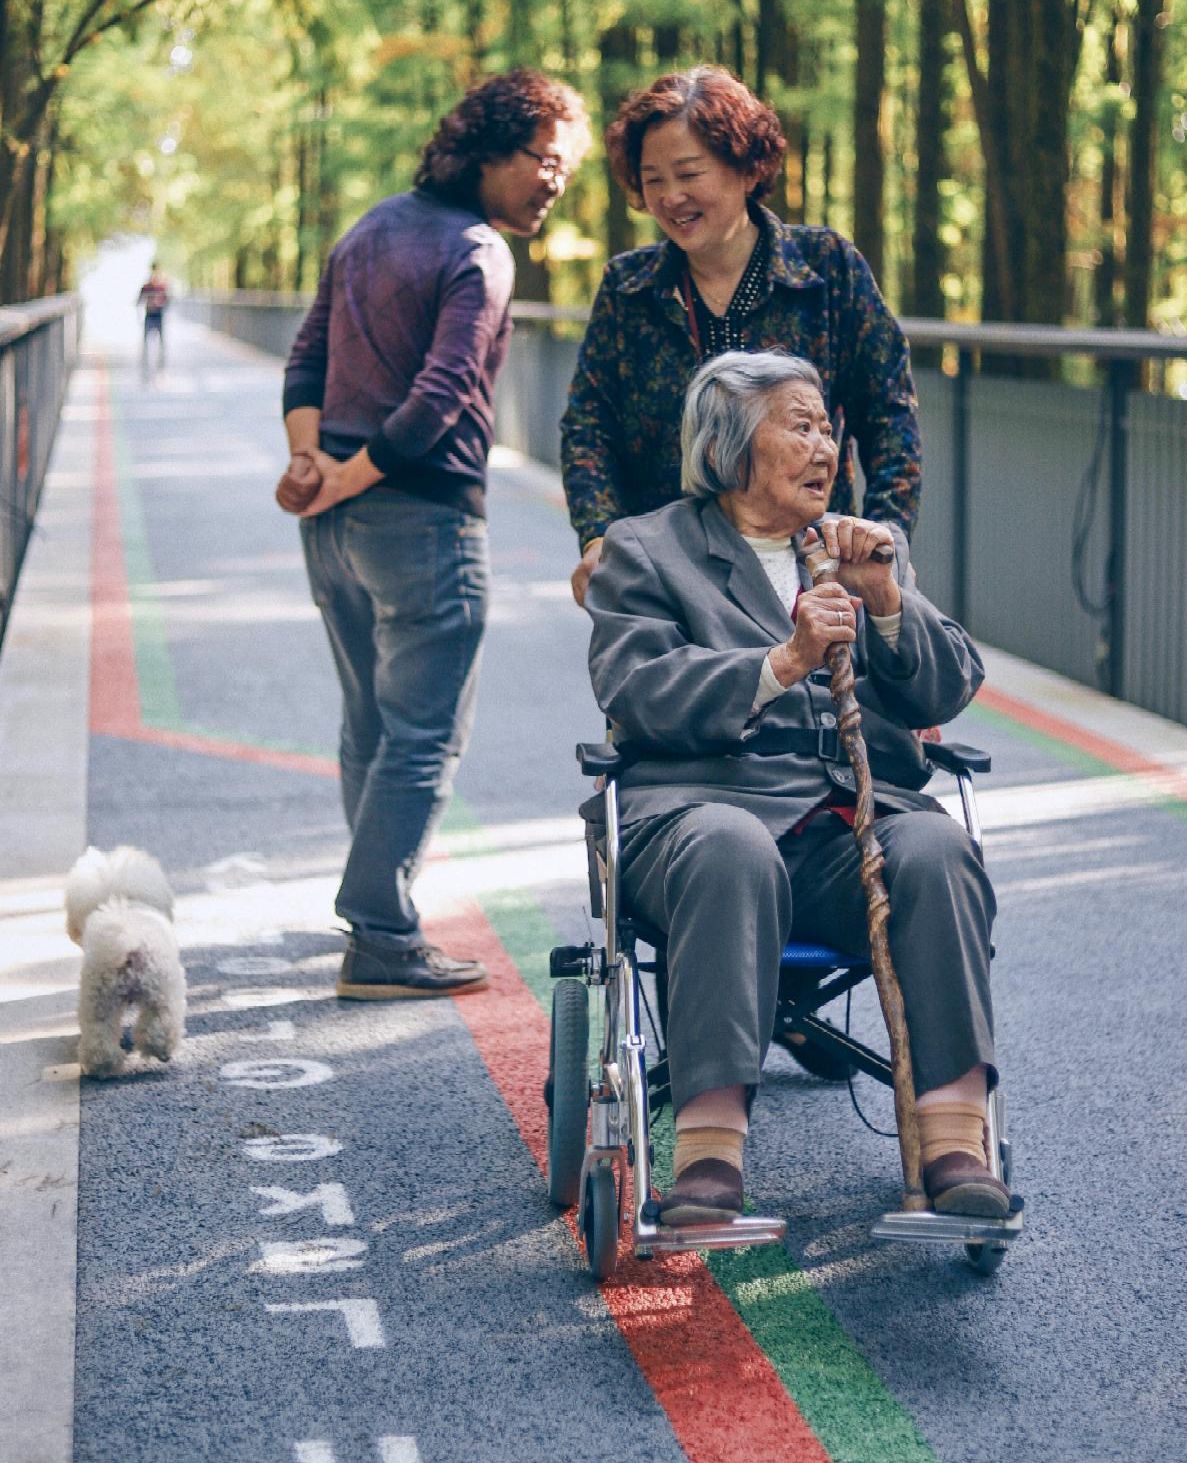 two adults behind a woman in a wheelchair discussing her incapacity